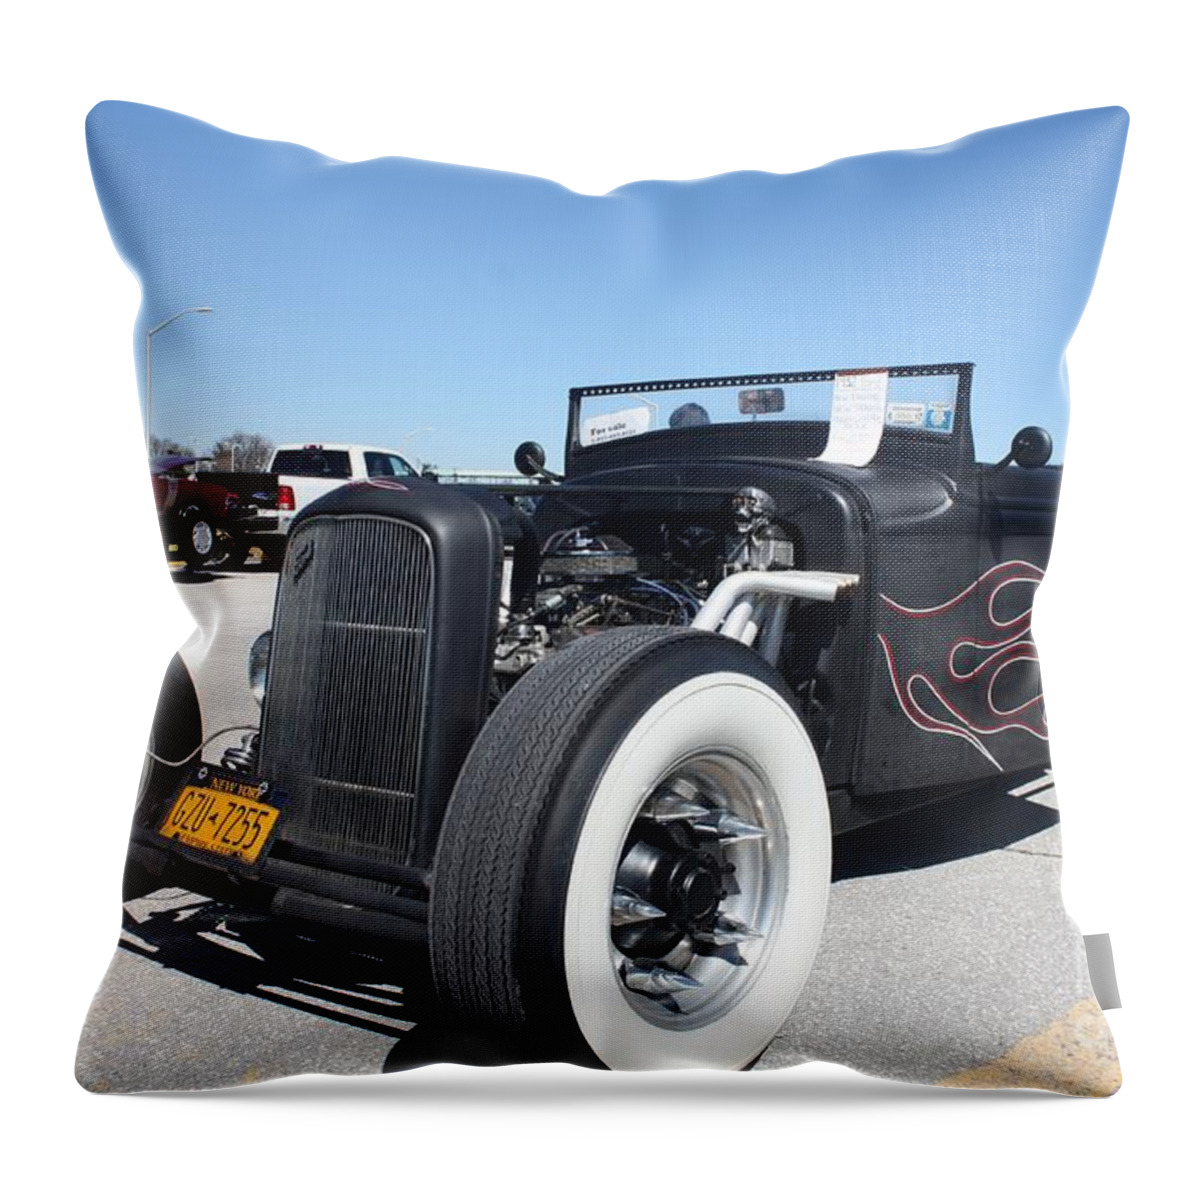 1932 Ford Rat Hot Rod Throw Pillow featuring the photograph 1932 Ford Rat Hot Rod by John Telfer